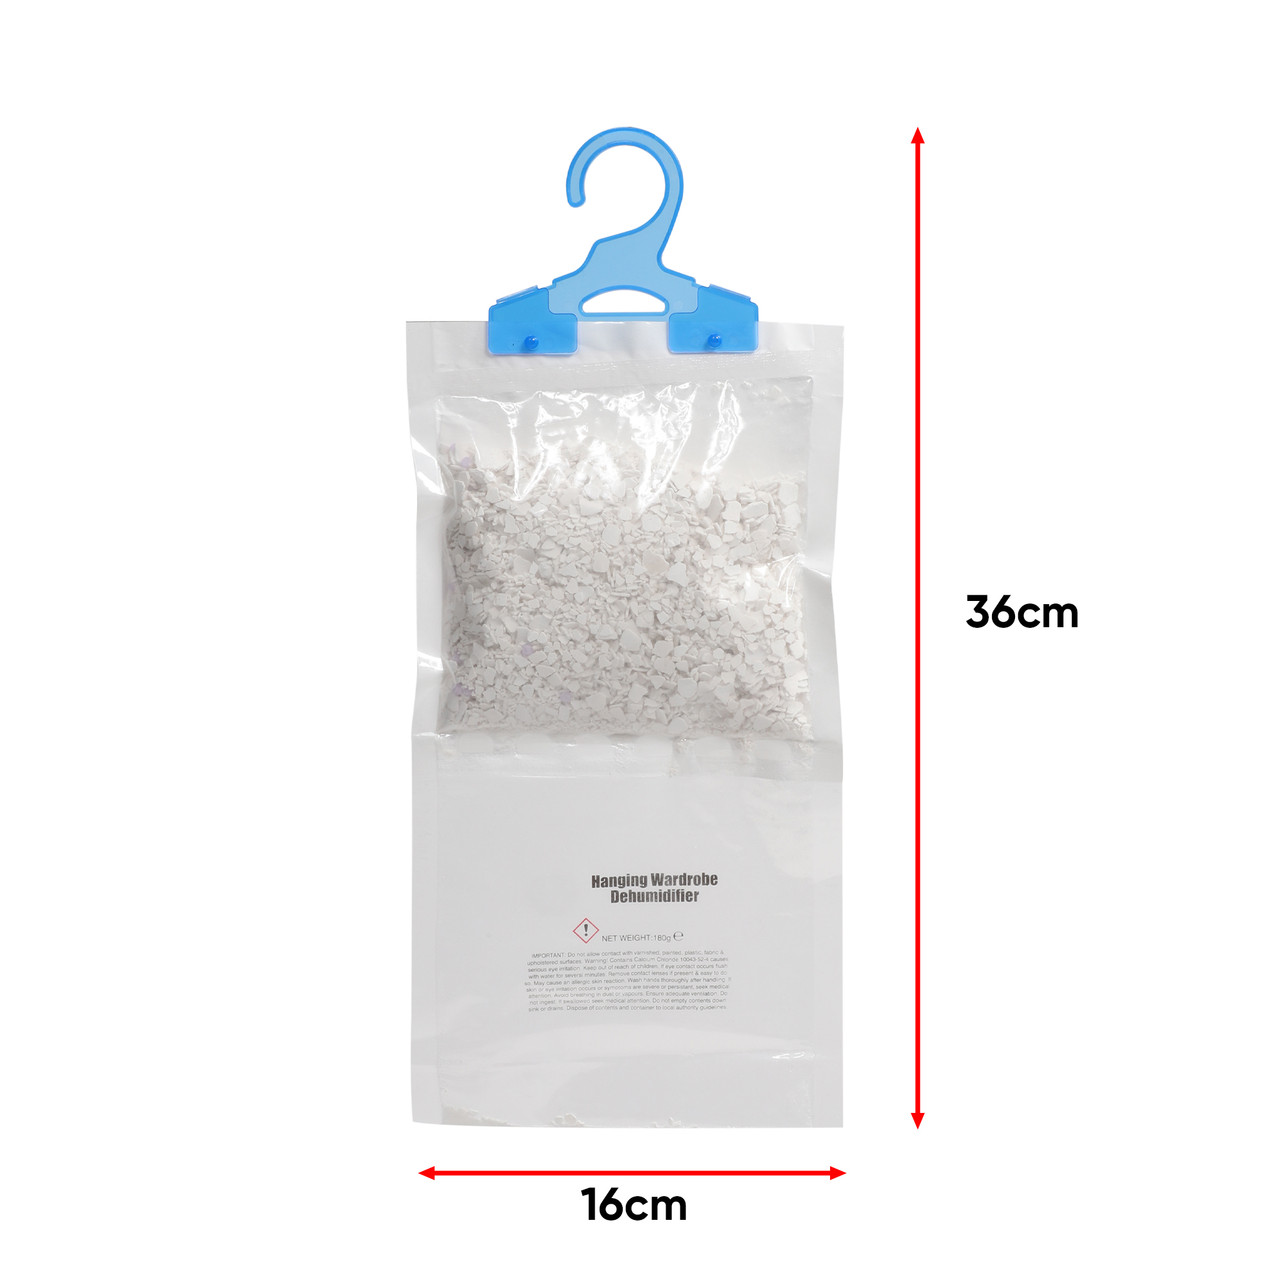 HANGING WARDROBE DEHUMIDIFIER SCENTED CRYSTALS DAMP MOULD MOISTURE  CONDENSATE